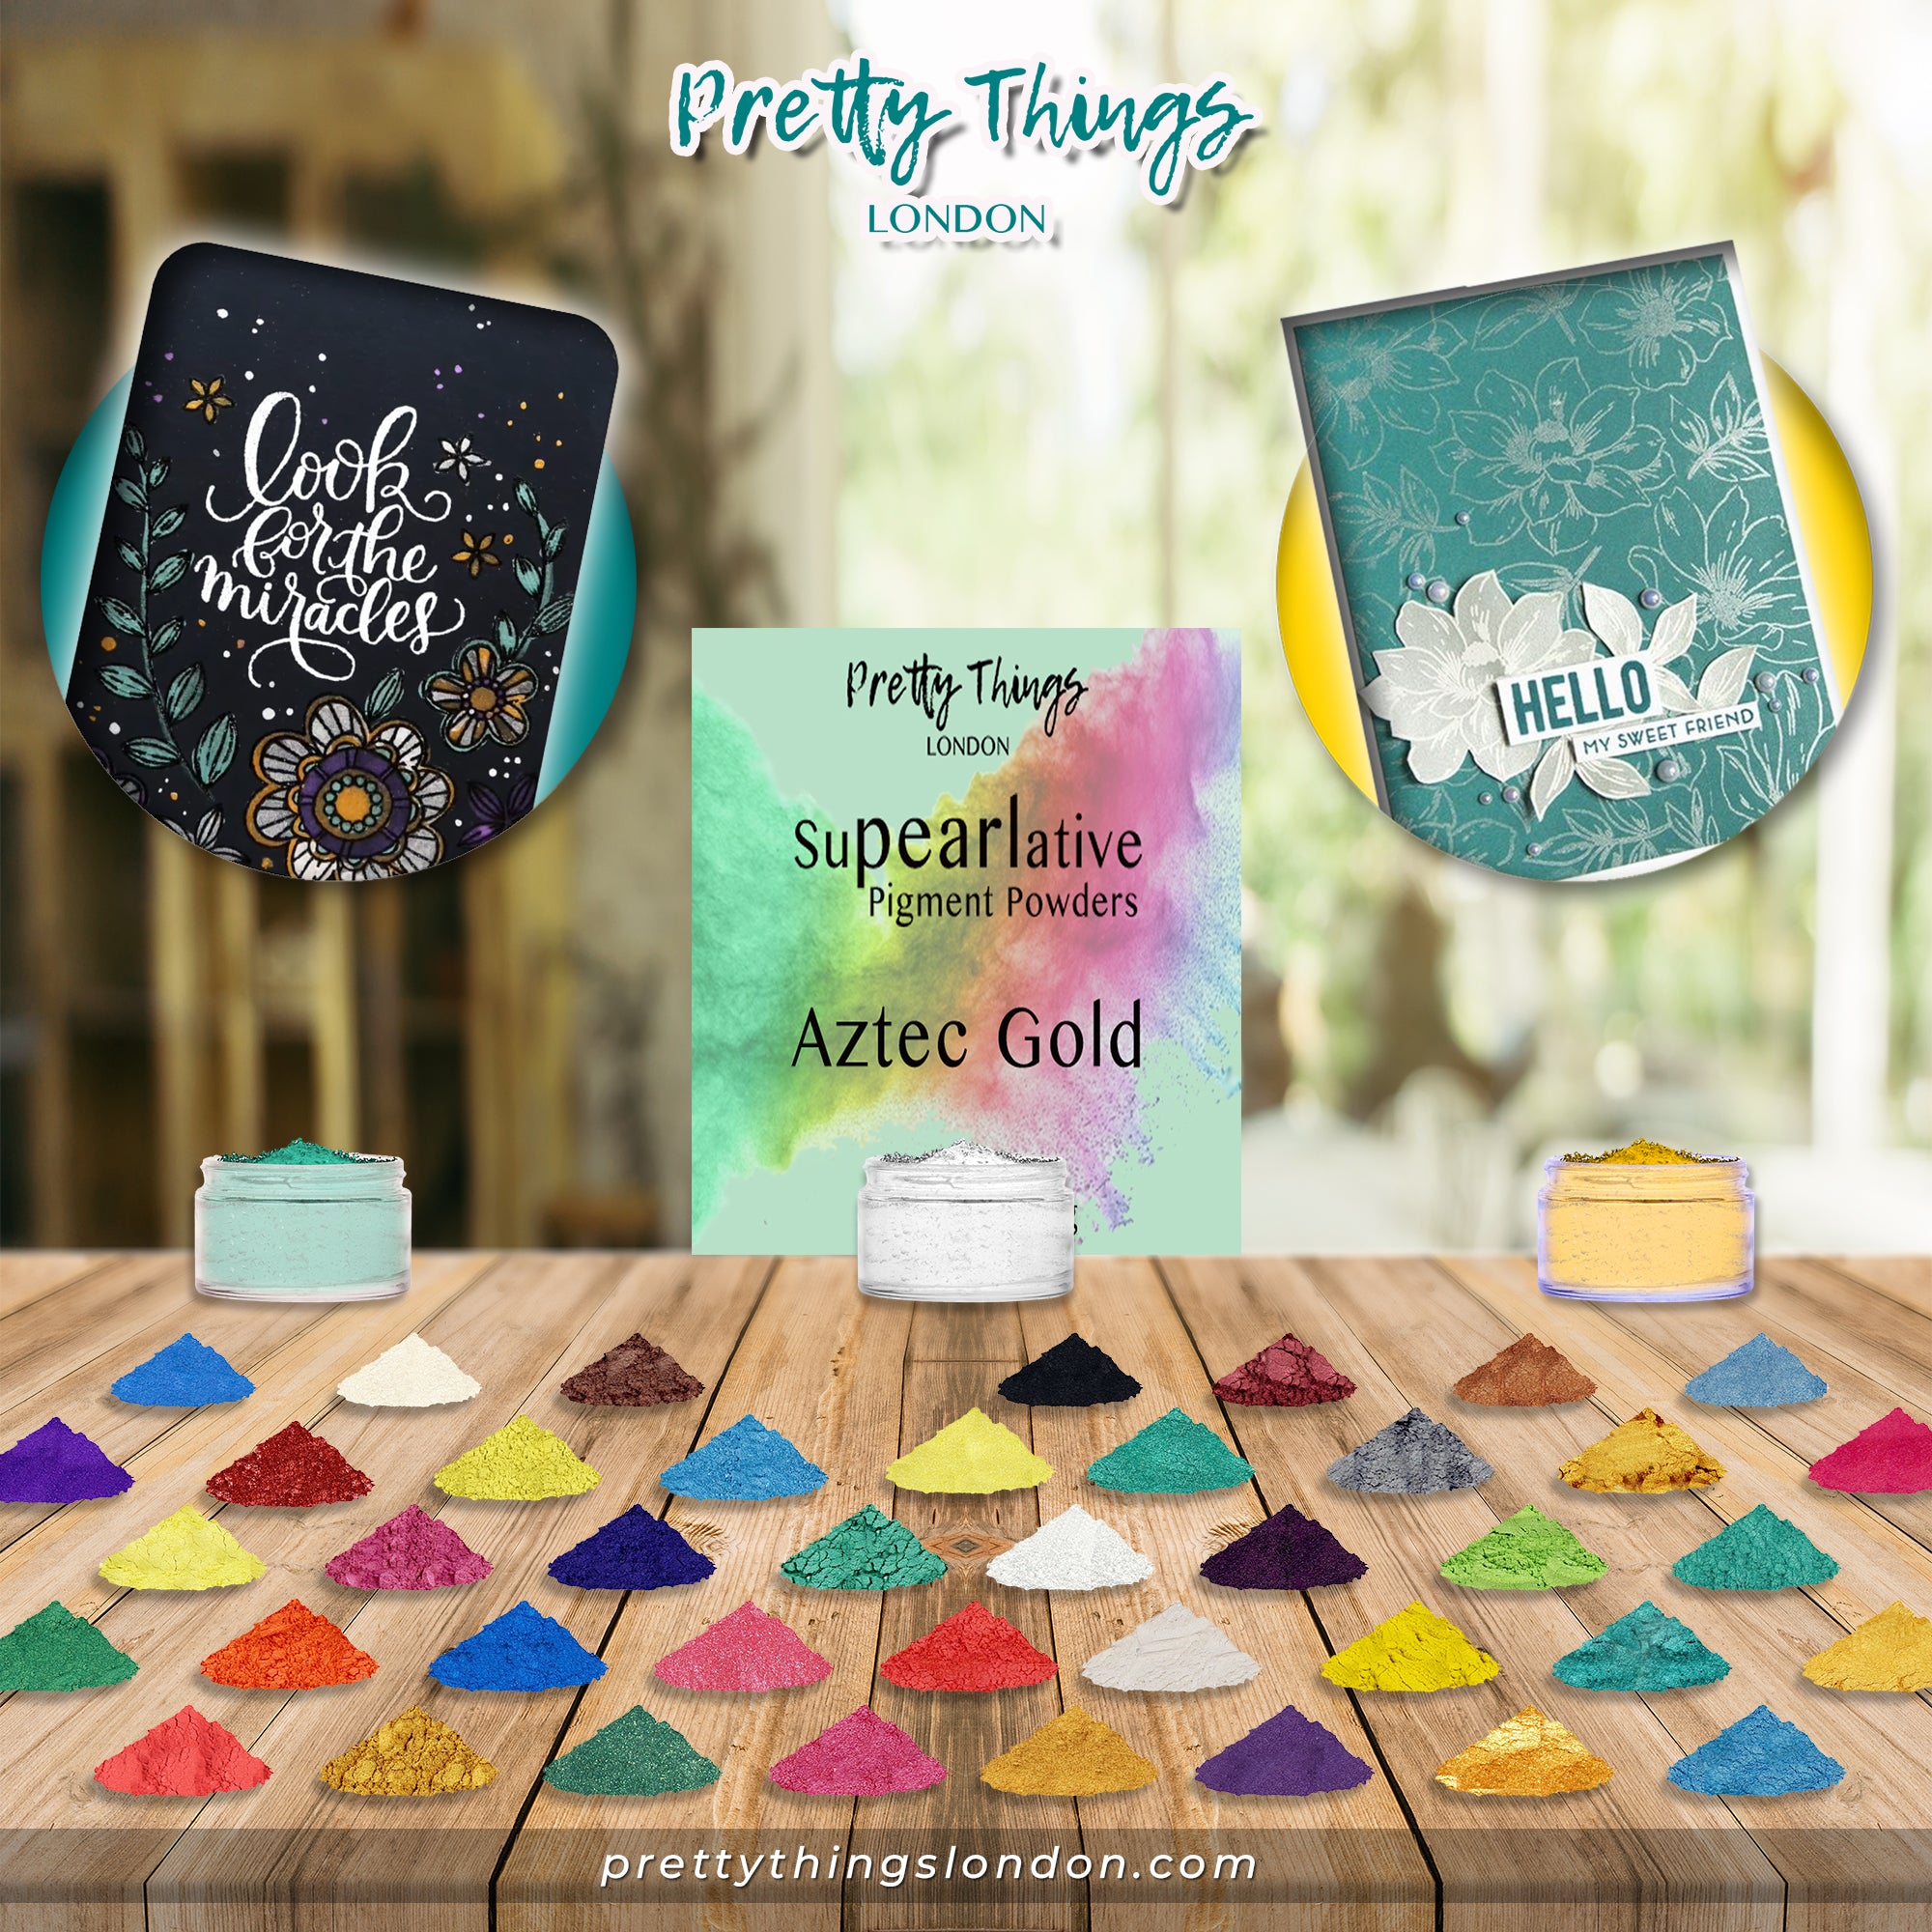 How To Use Pearl Pigments Powder by Pretty Things London